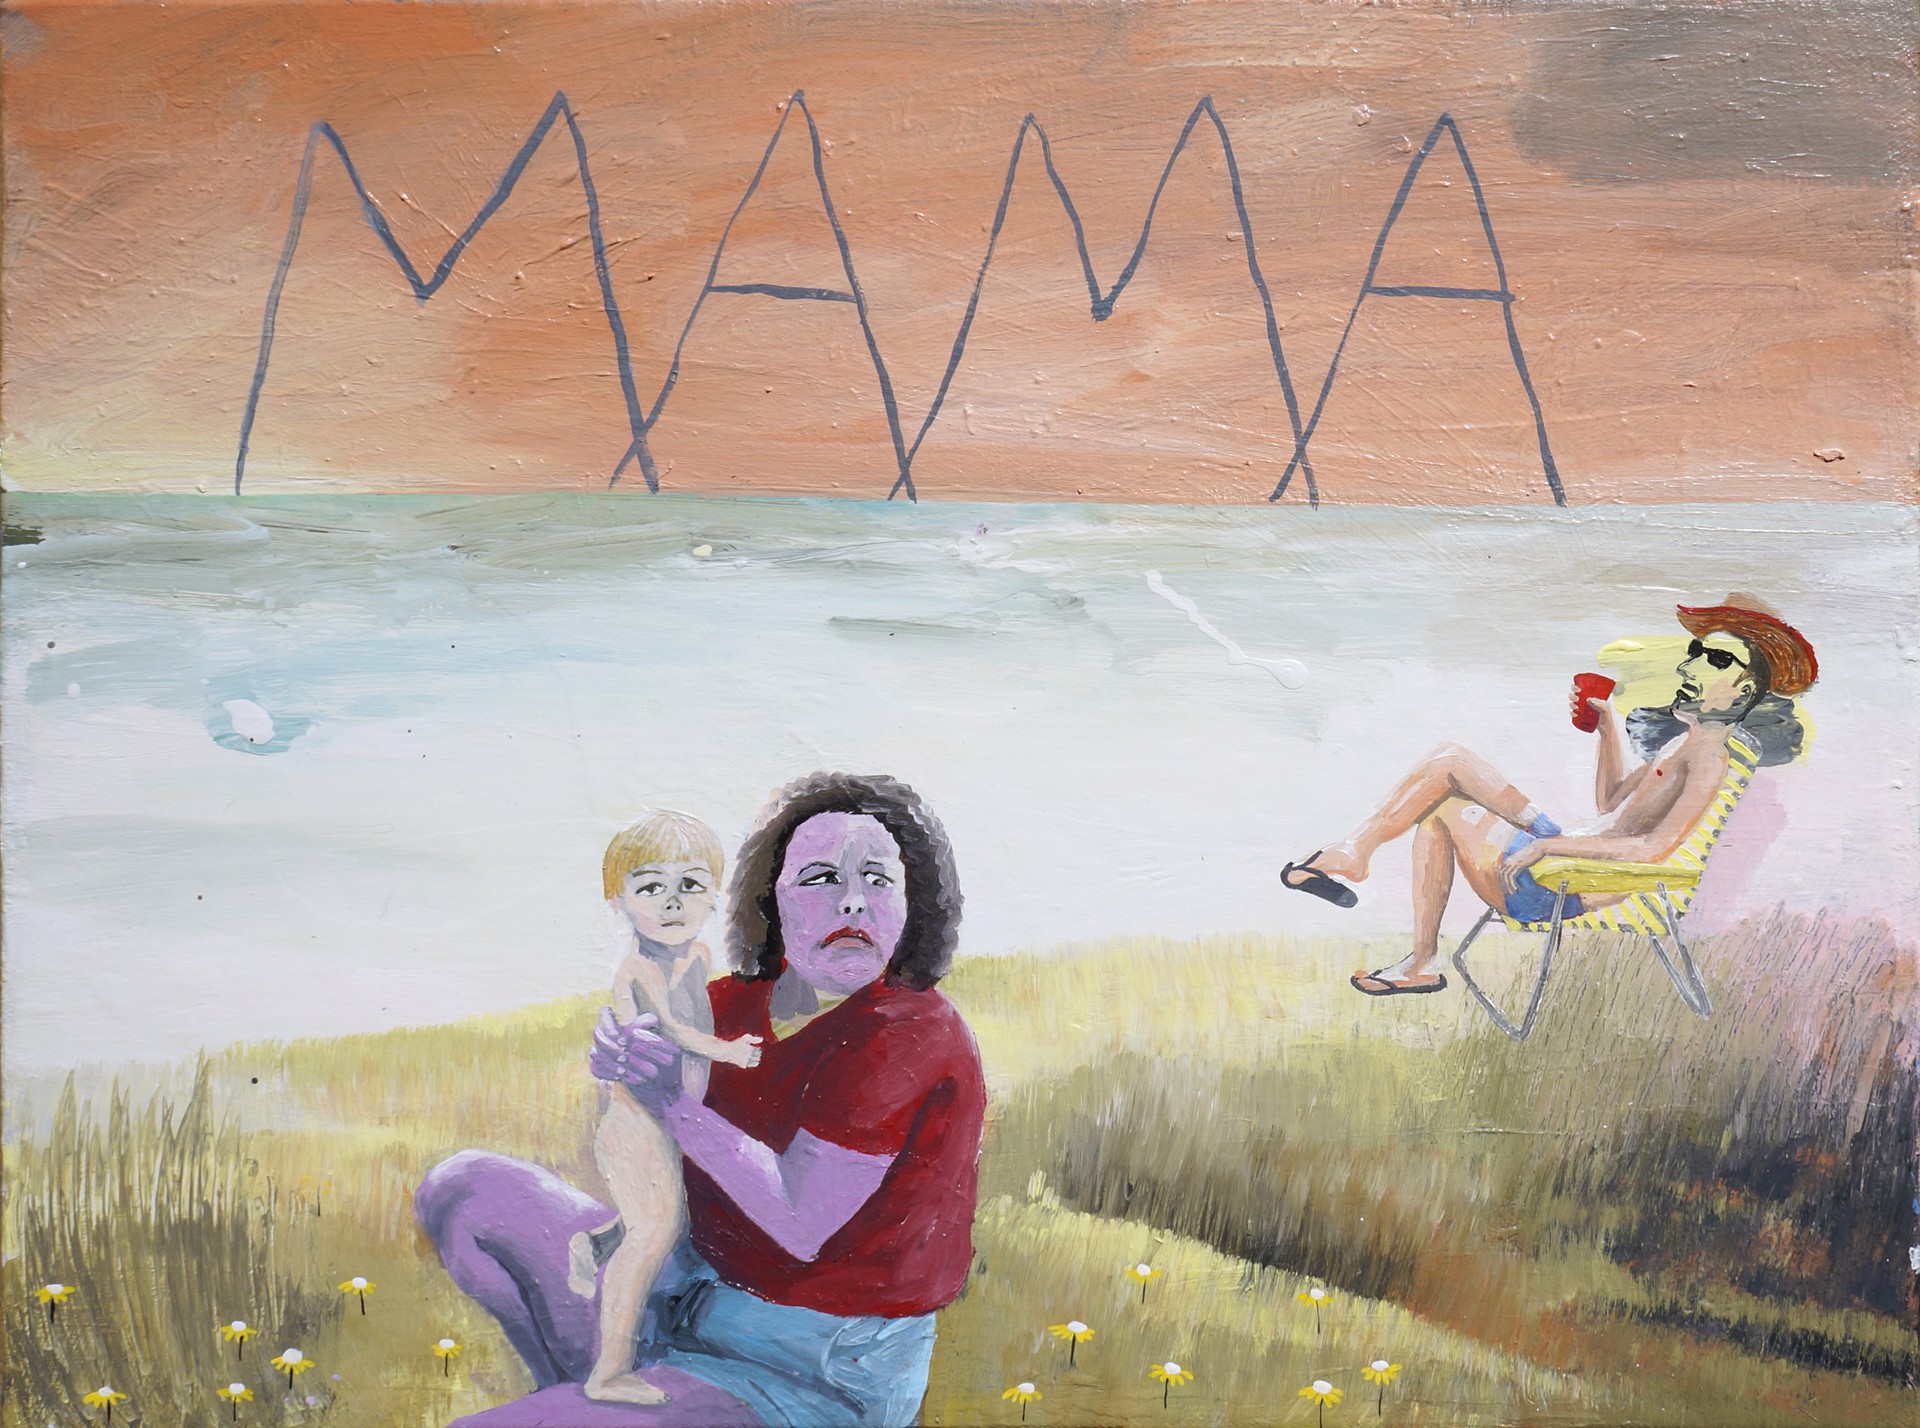 Mama by Cate White